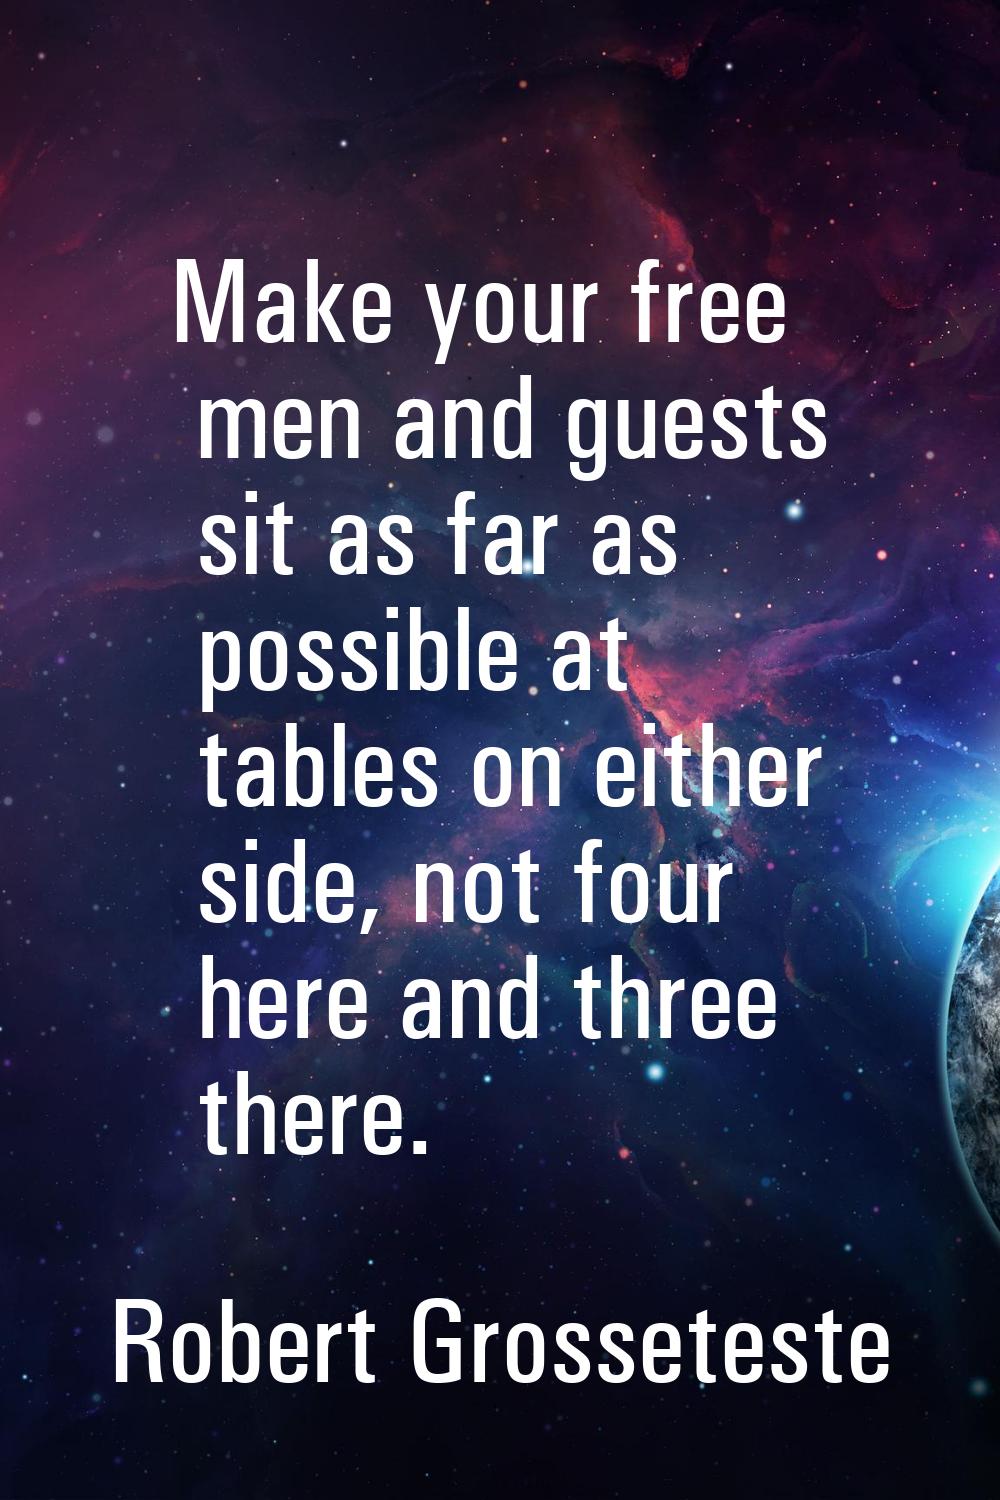 Make your free men and guests sit as far as possible at tables on either side, not four here and th